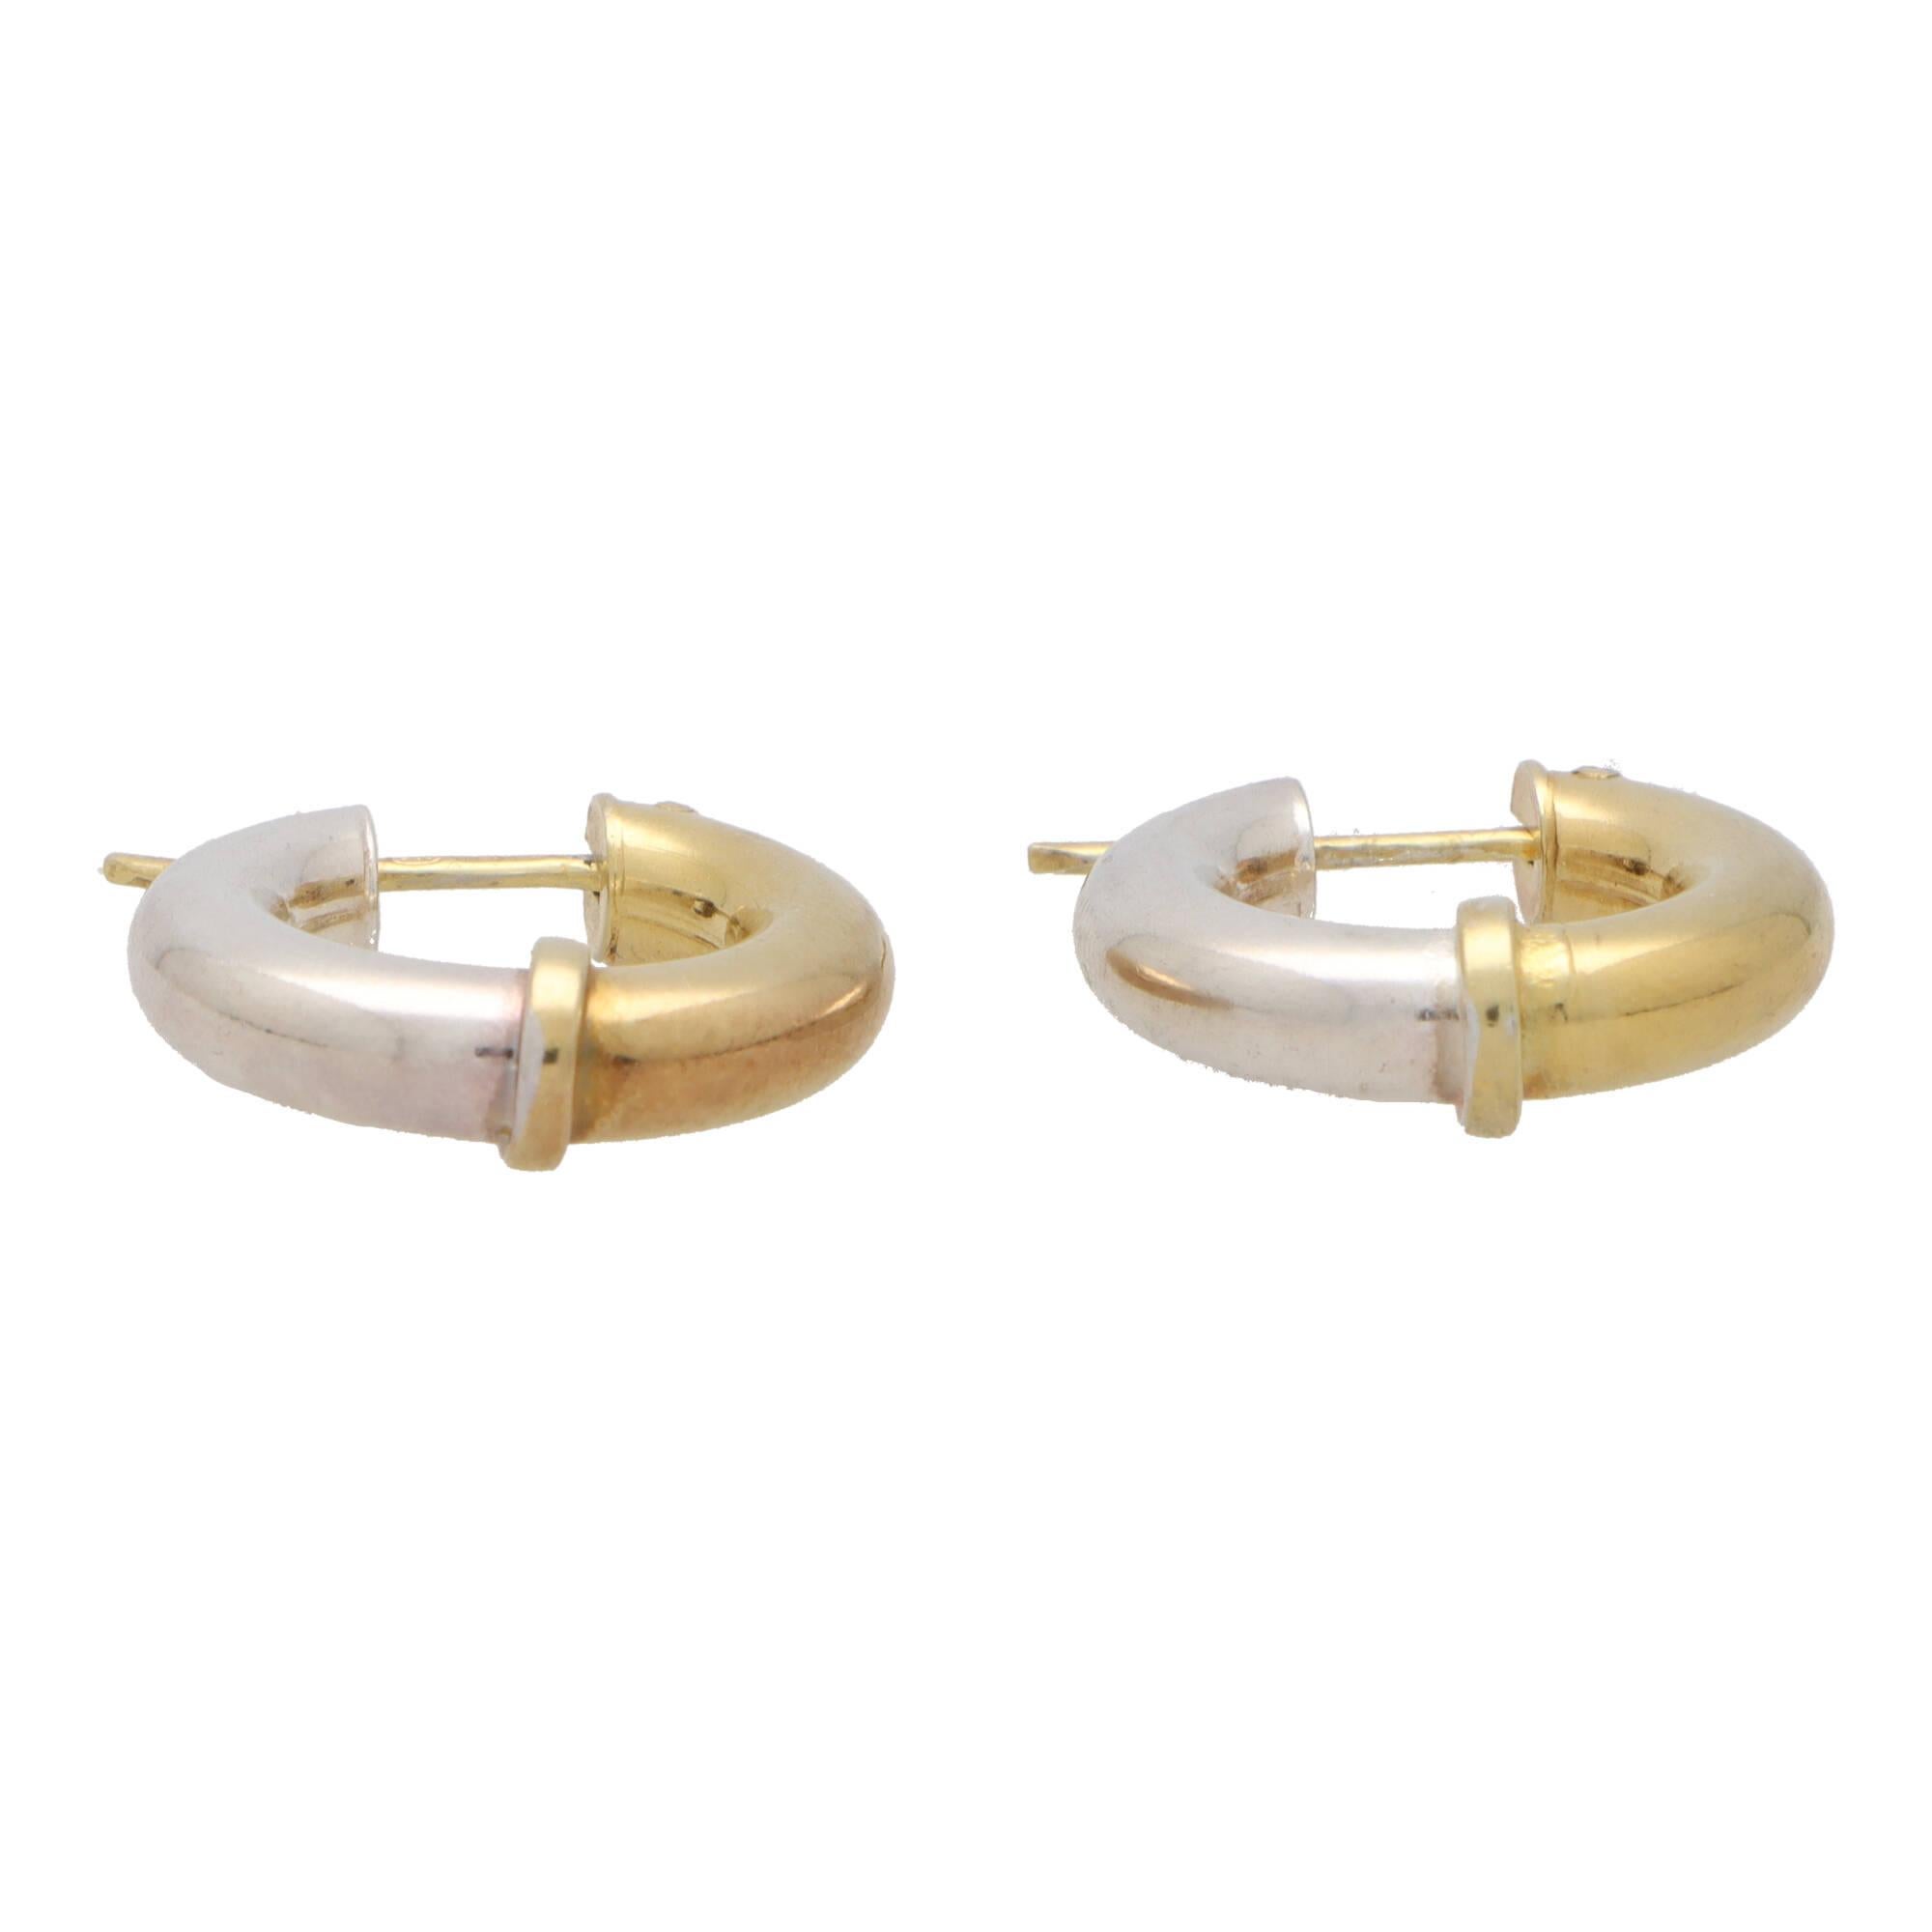 A stylish everyday pair of retro 9k yellow gold and silver chunky hoop earrings.

These fabulous earrings are composed of a 22-millimetre round hoop, split perfectly into two panels. The one panel being 9k yellow gold, and the other silver. The